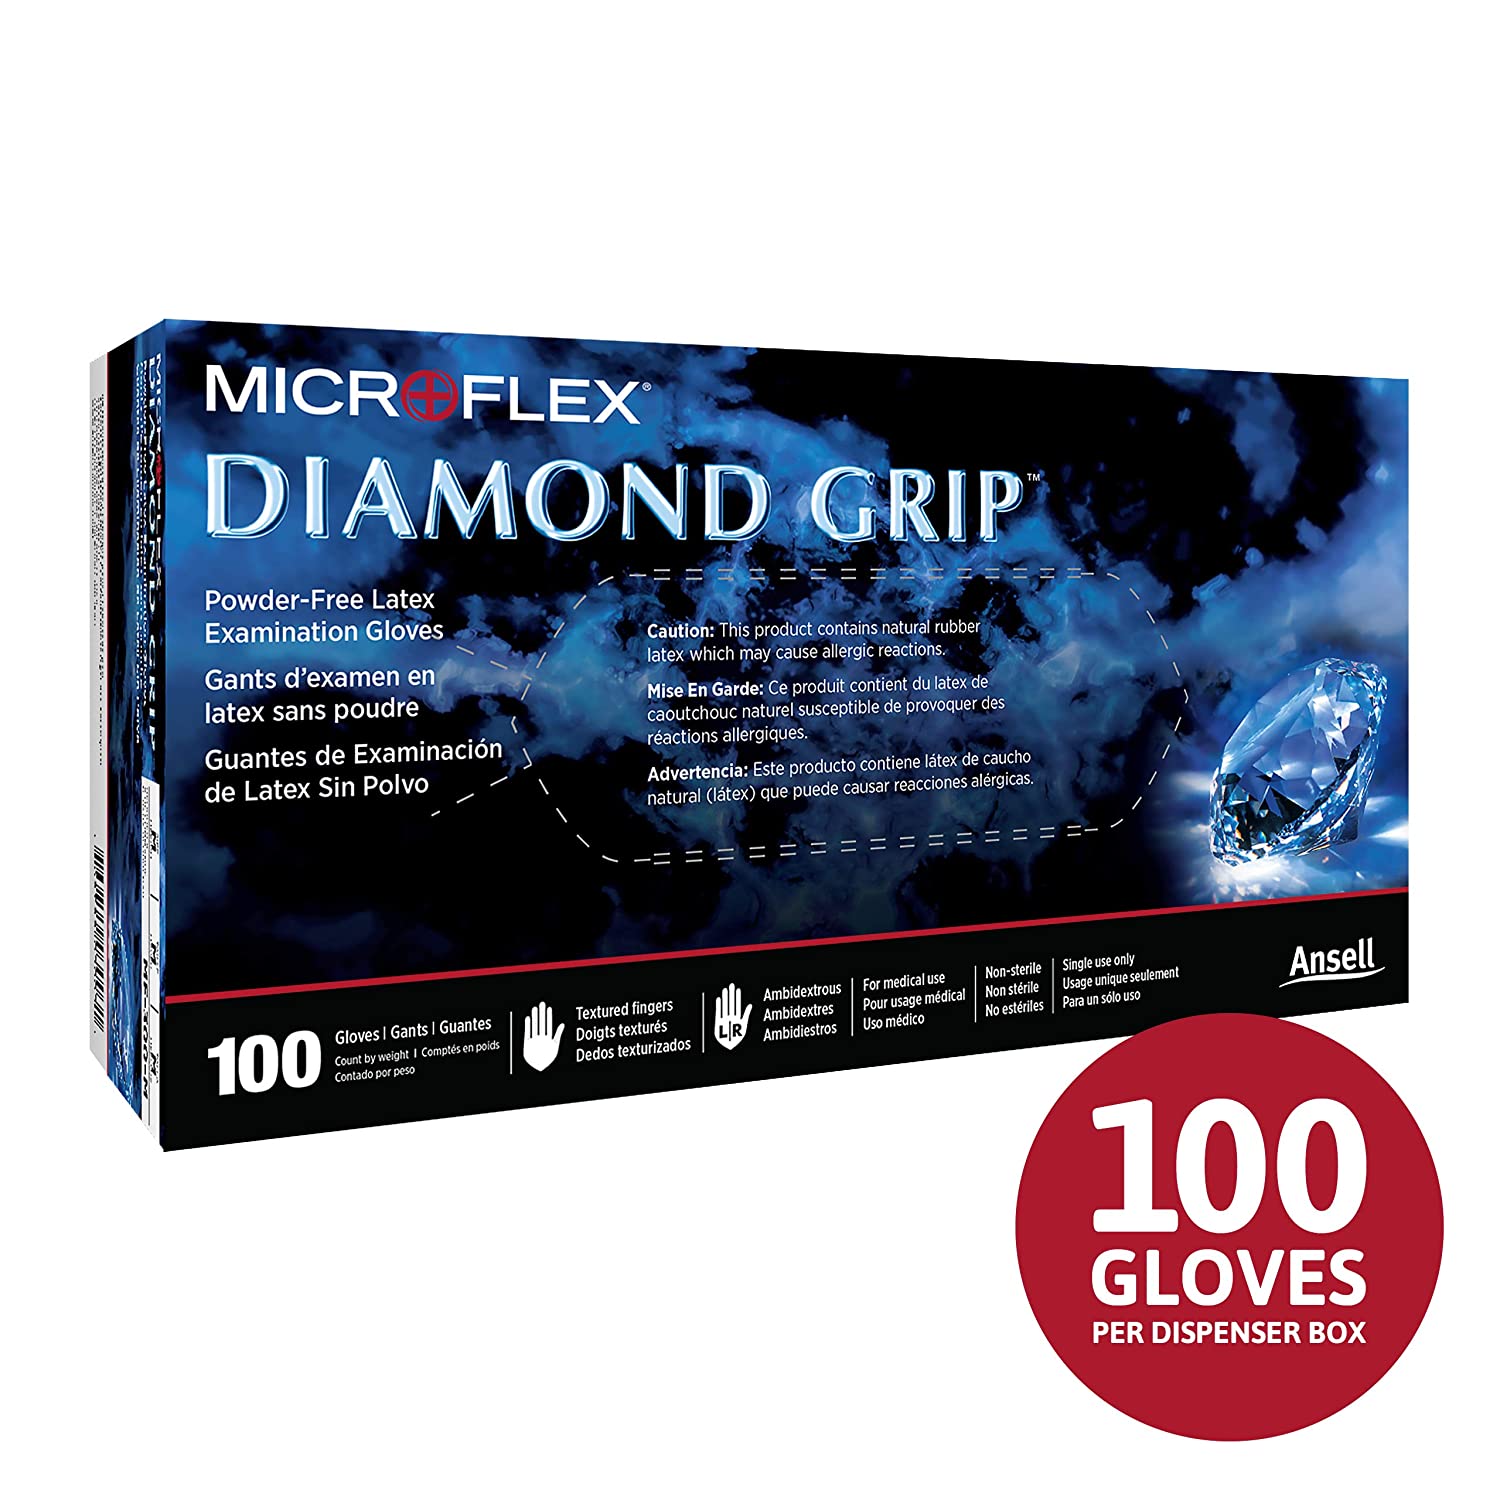 Microflex Diamond Grip MF-300 Disposable Gloves in Latex Multi-Purpose, Powder Free Glove in Natural Rubber for Exam, Cleaning or Mechanic Tasks, White, Size Medium, Box of 100 Units - MPR To